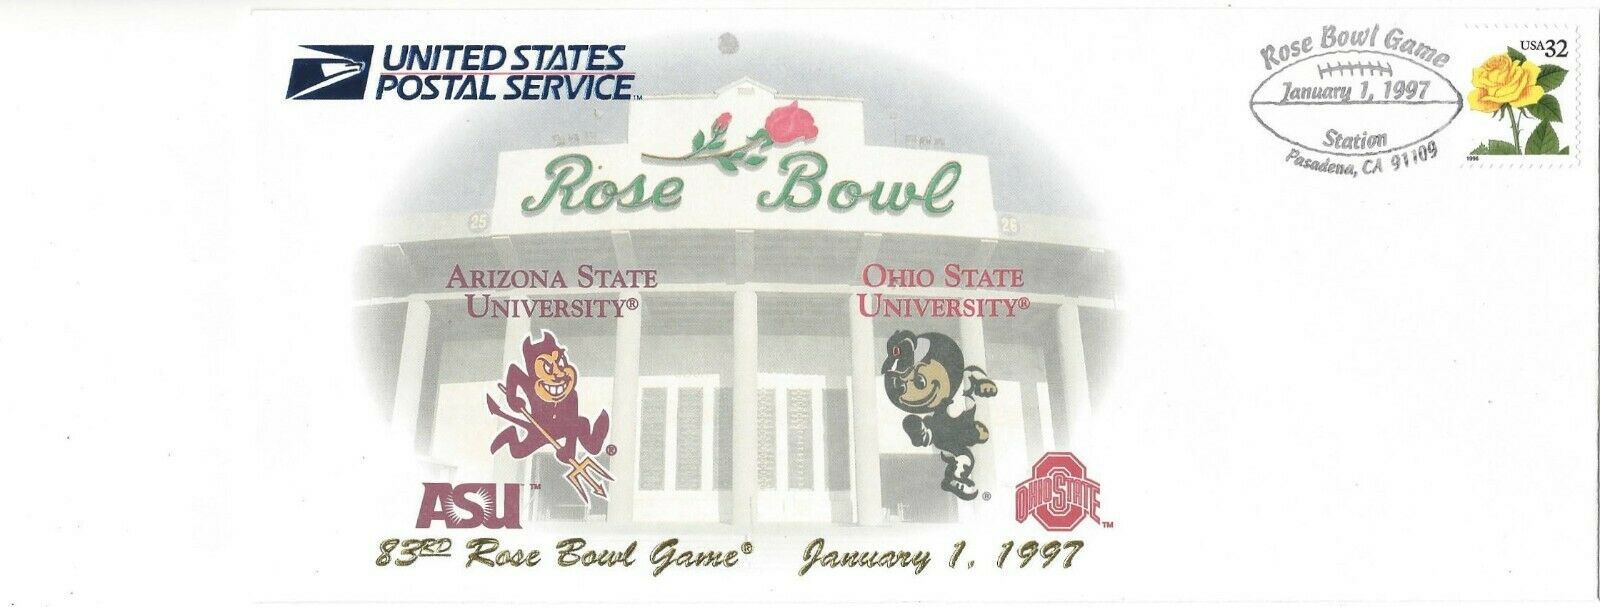 Primary image for 1997 Rose Bowl Football Game Arizona/Ohio State Commemorative Cover